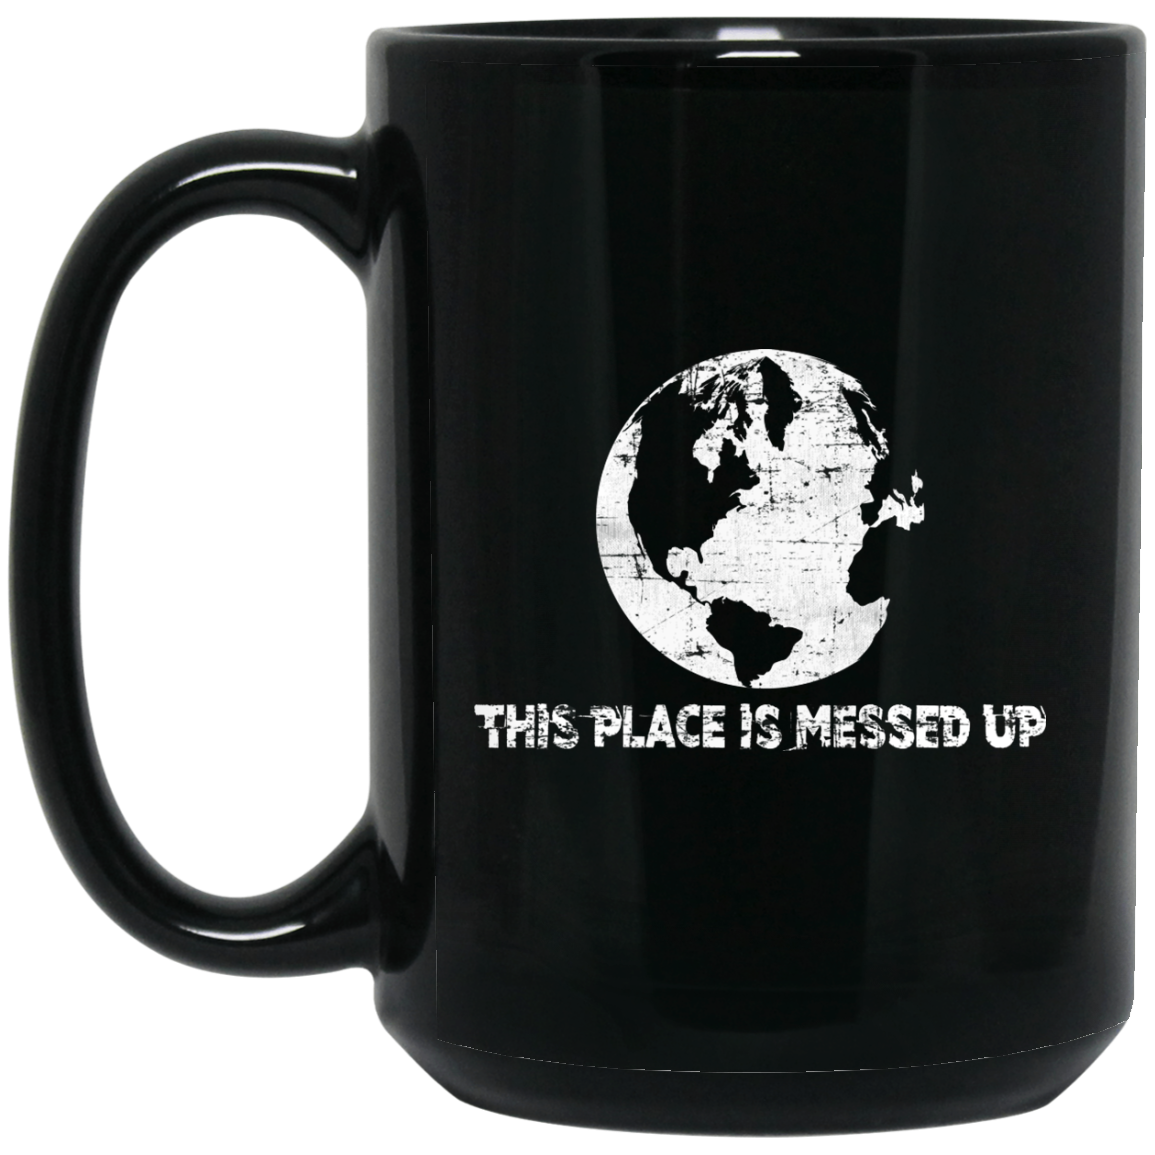 Vegan gifts - Go Green Mug, This Place is Messed Up - GoneBold.gift